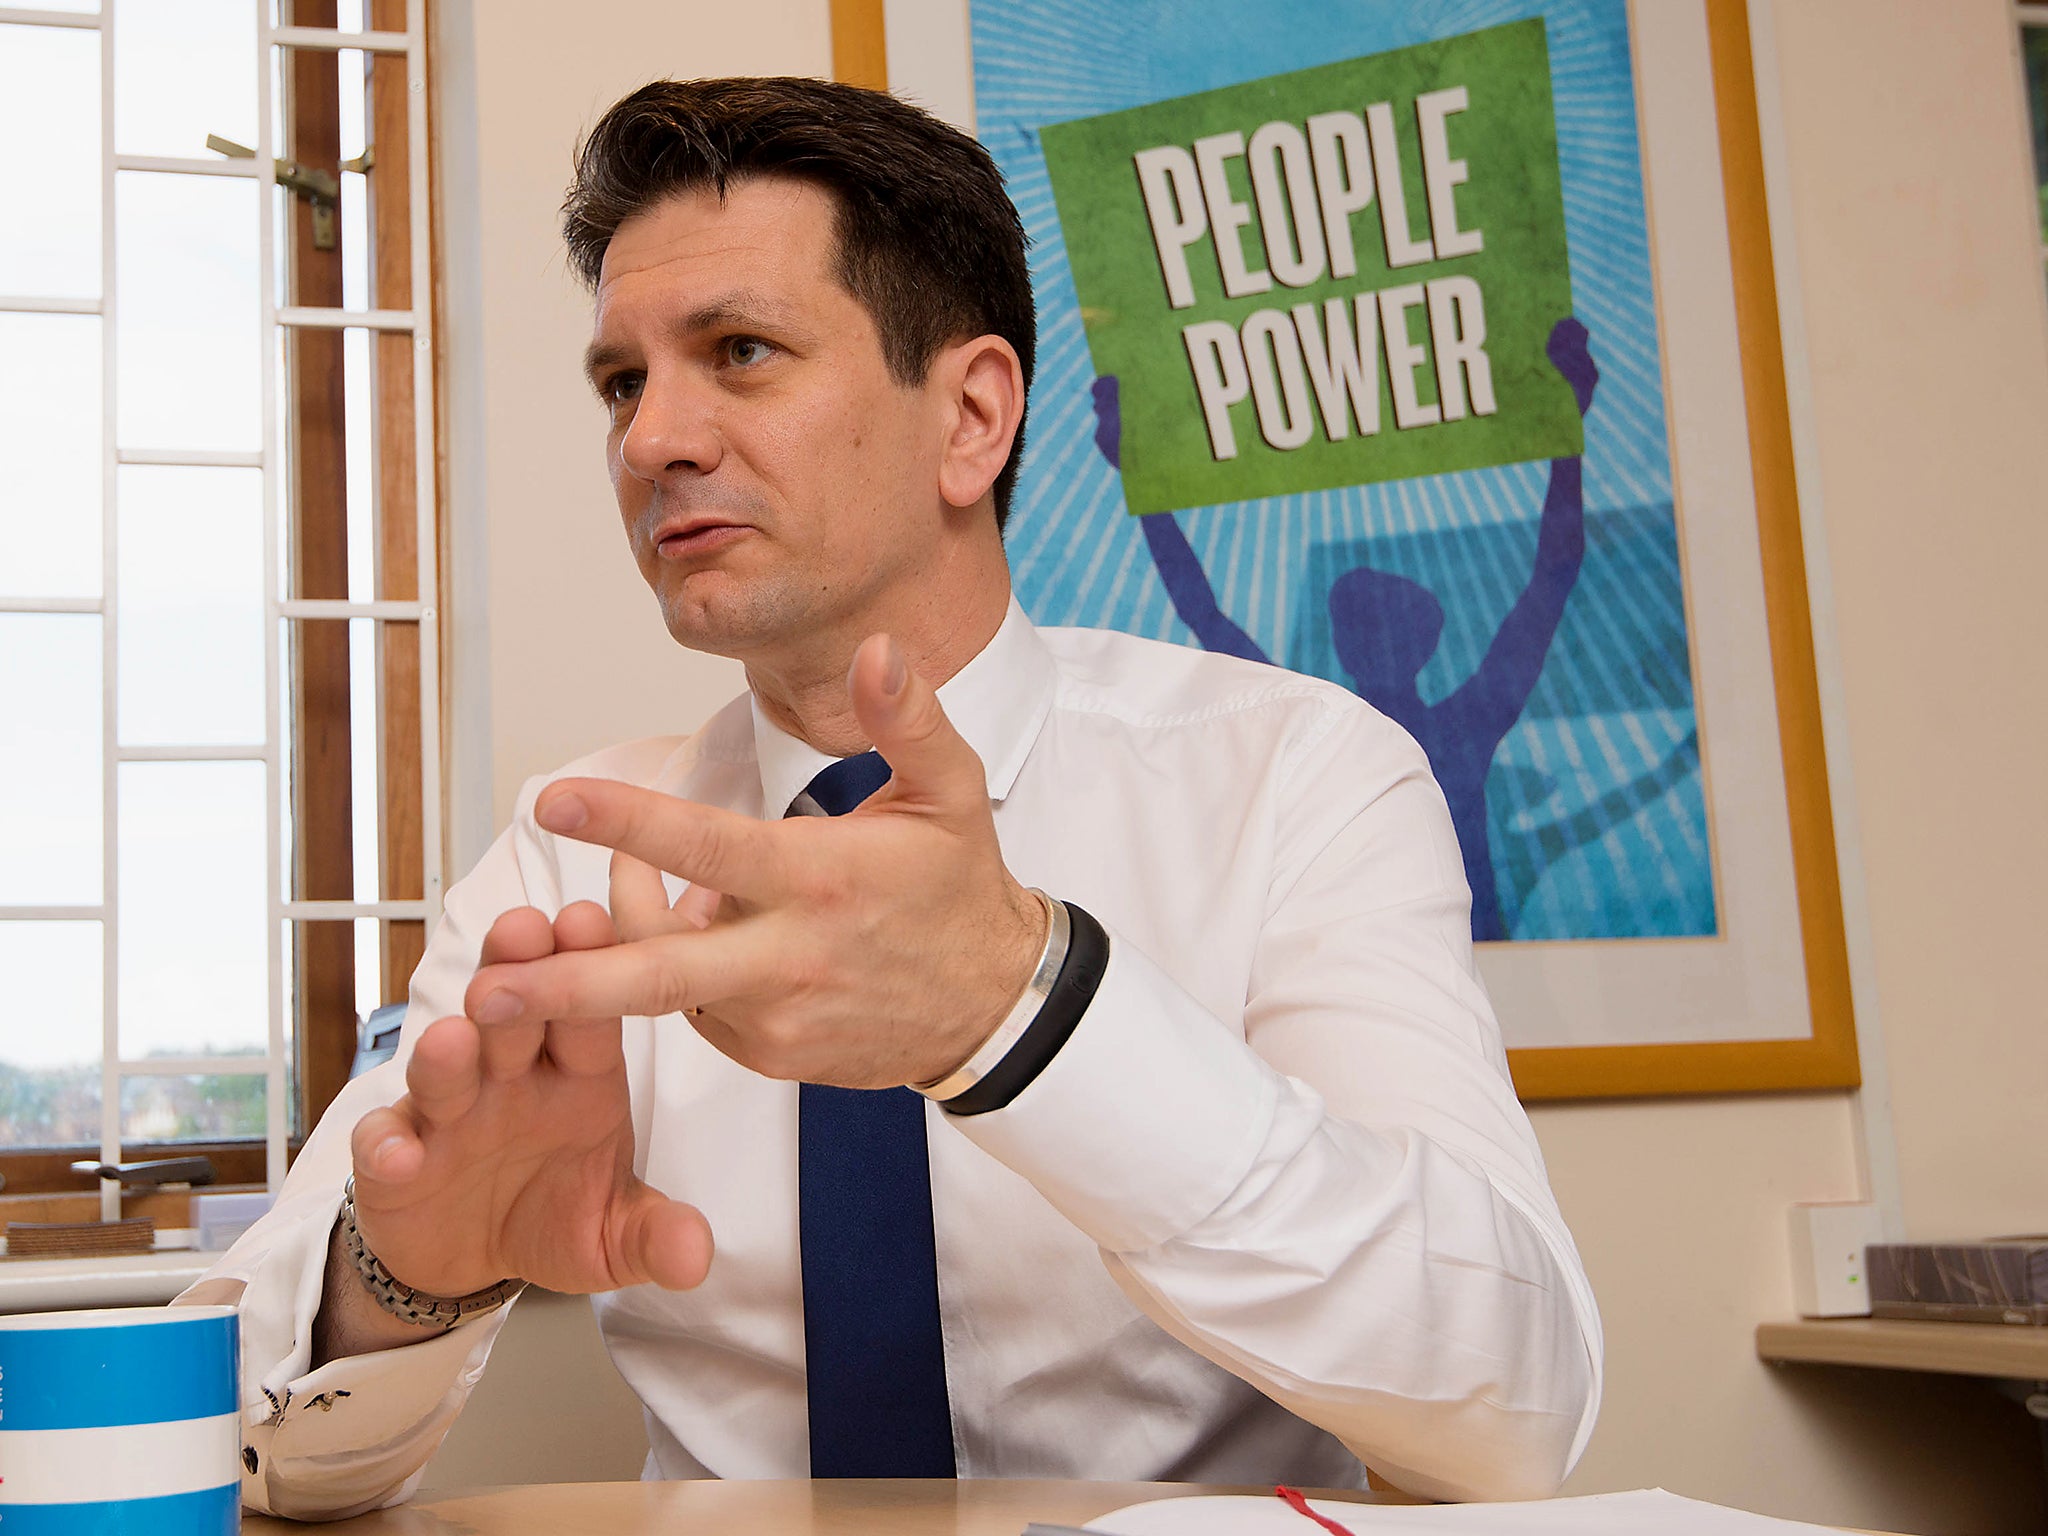 Steve Baker has been vocal in calling for Britain to leave the EU single market